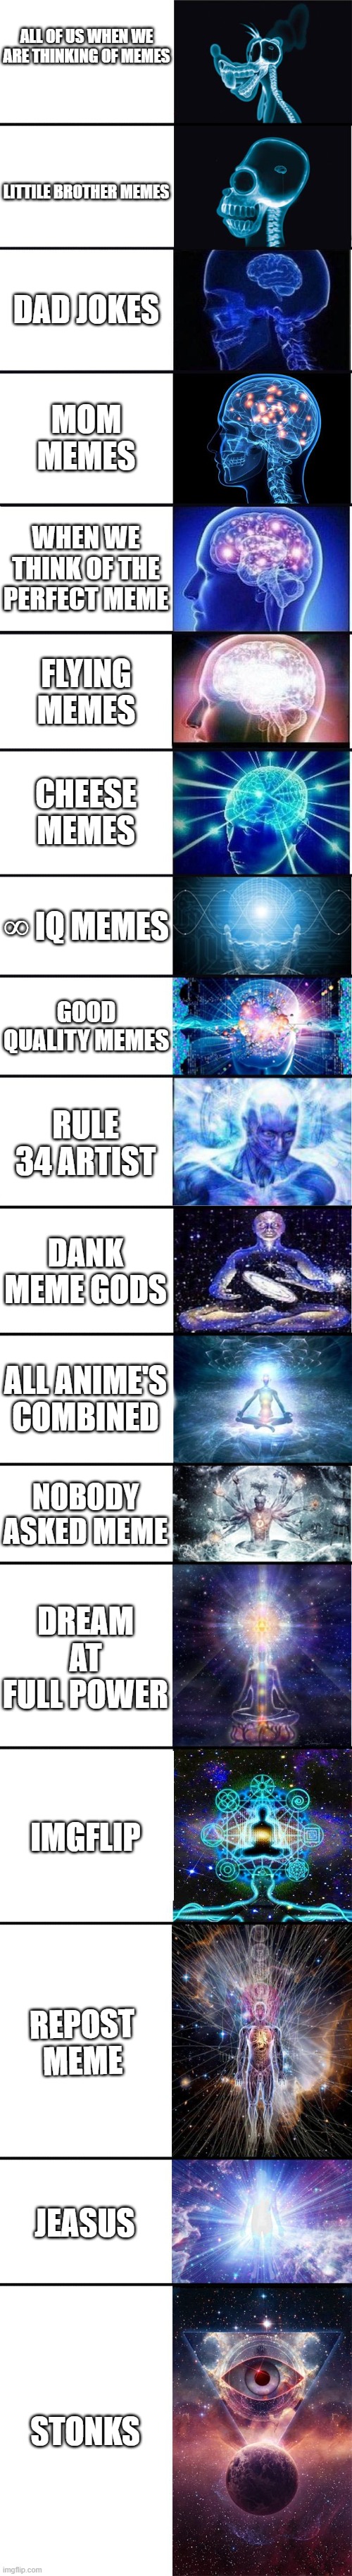 when a meme god is board this happens | ALL OF US WHEN WE ARE THINKING OF MEMES; LITTILE BROTHER MEMES; DAD JOKES; MOM MEMES; WHEN WE THINK OF THE PERFECT MEME; FLYING MEMES; CHEESE MEMES; ∞ IQ MEMES; GOOD QUALITY MEMES; RULE 34 ARTIST; DANK MEME GODS; ALL ANIME'S COMBINED; NOBODY ASKED MEME; DREAM AT FULL POWER; IMGFLIP; REPOST MEME; JEASUS; STONKS | image tagged in expanding brain 9001 | made w/ Imgflip meme maker